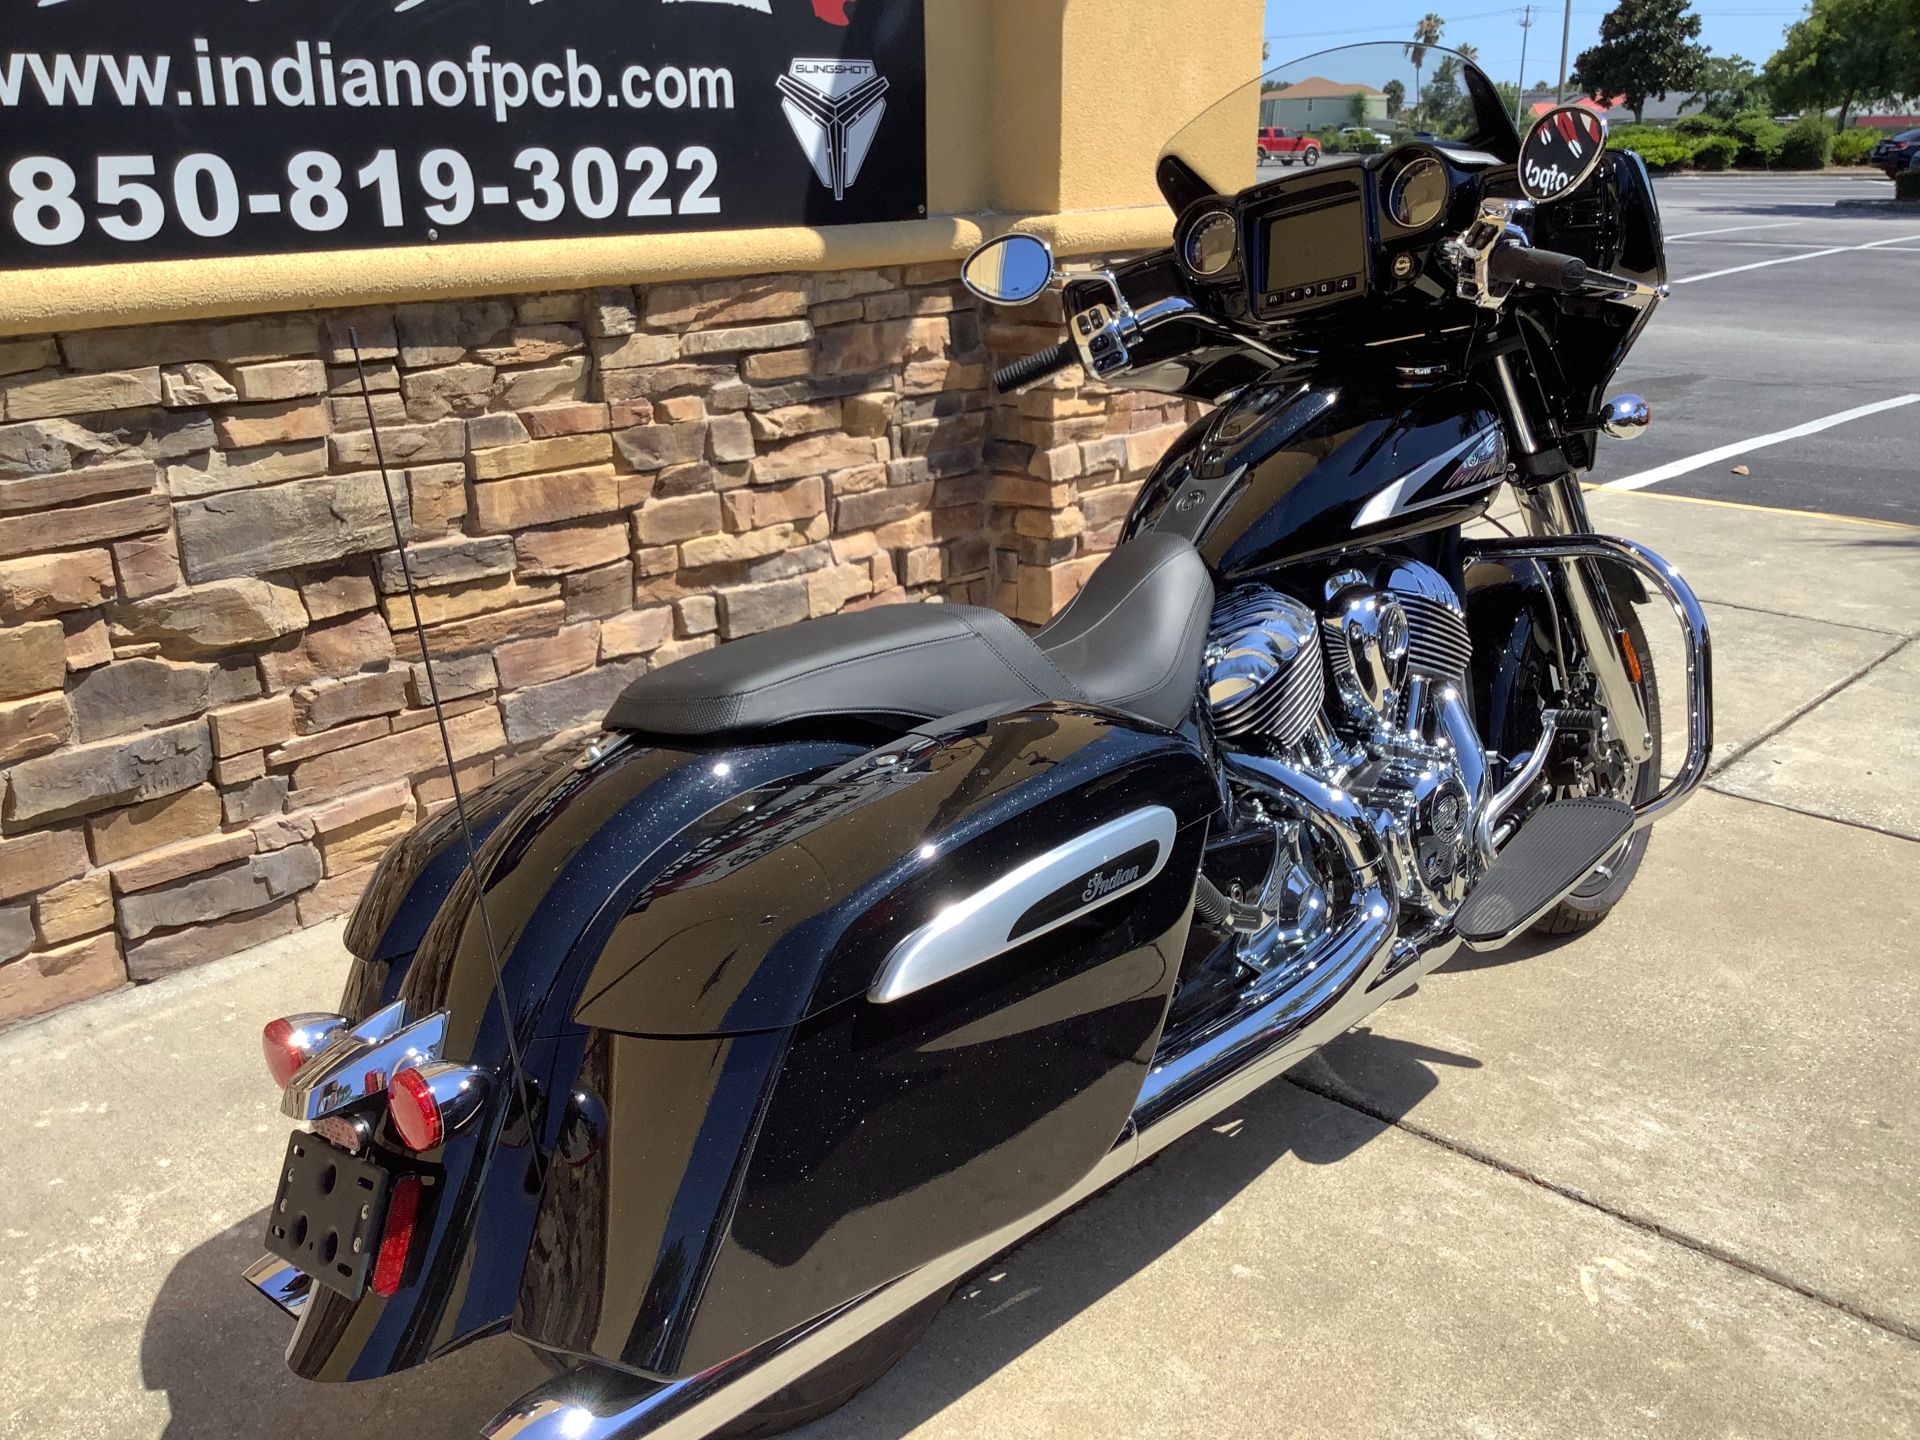 2021 Indian CHIEFTAIN LIMITED in Panama City Beach, Florida - Photo 6